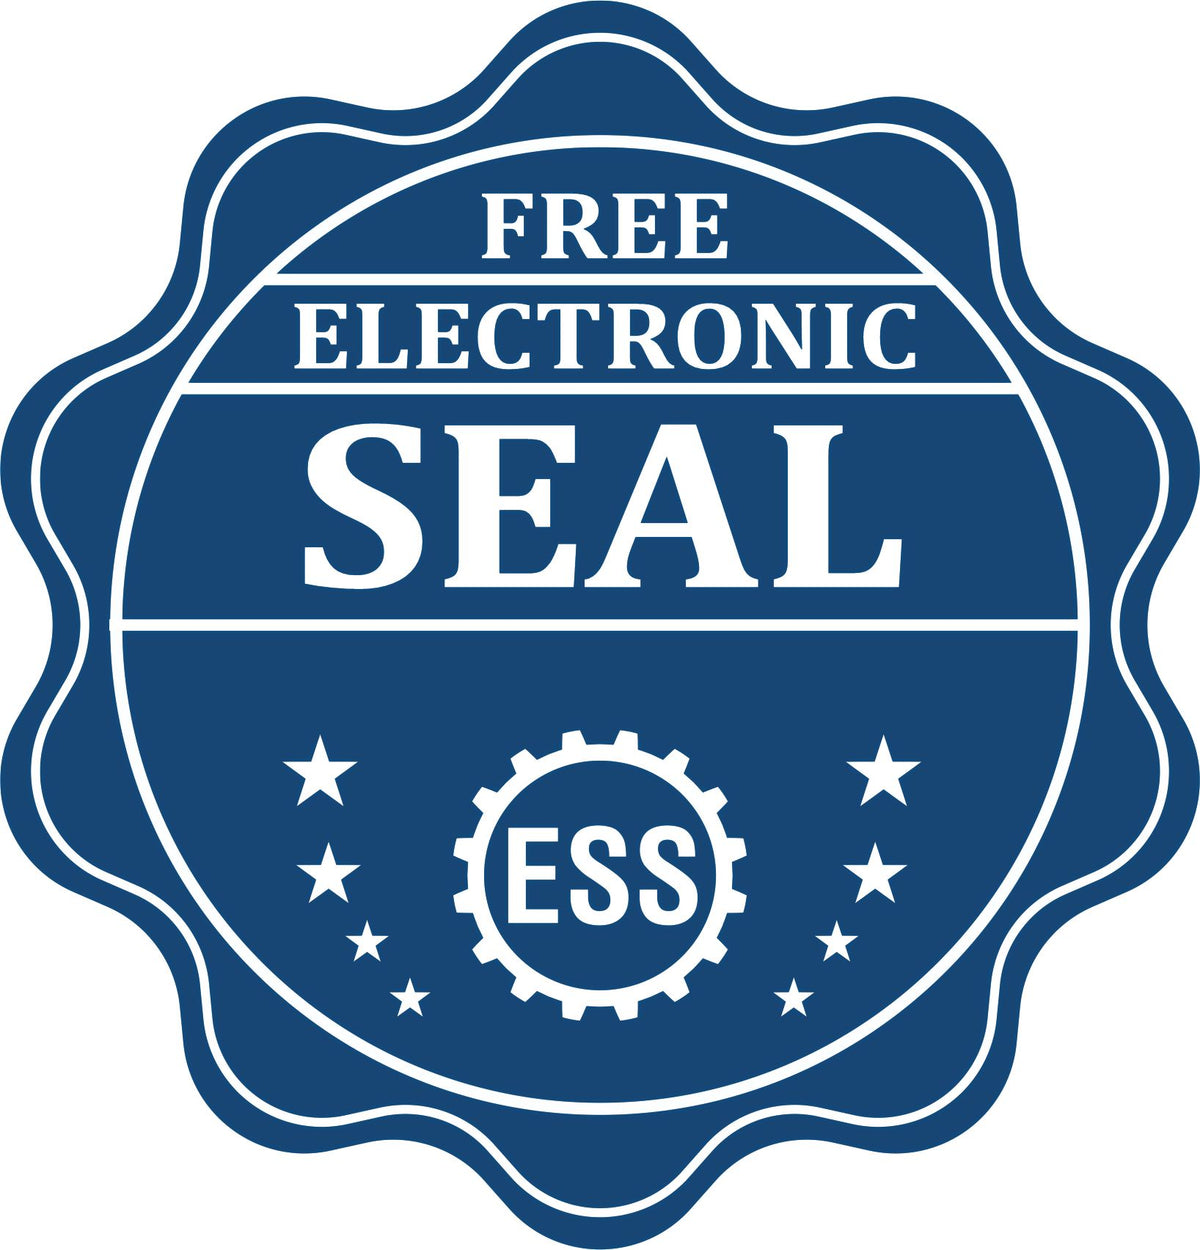 A badge showing a free electronic seal for the Heavy Duty Cast Iron Connecticut Geologist Seal Embosser with stars and the ESS gear on the emblem.